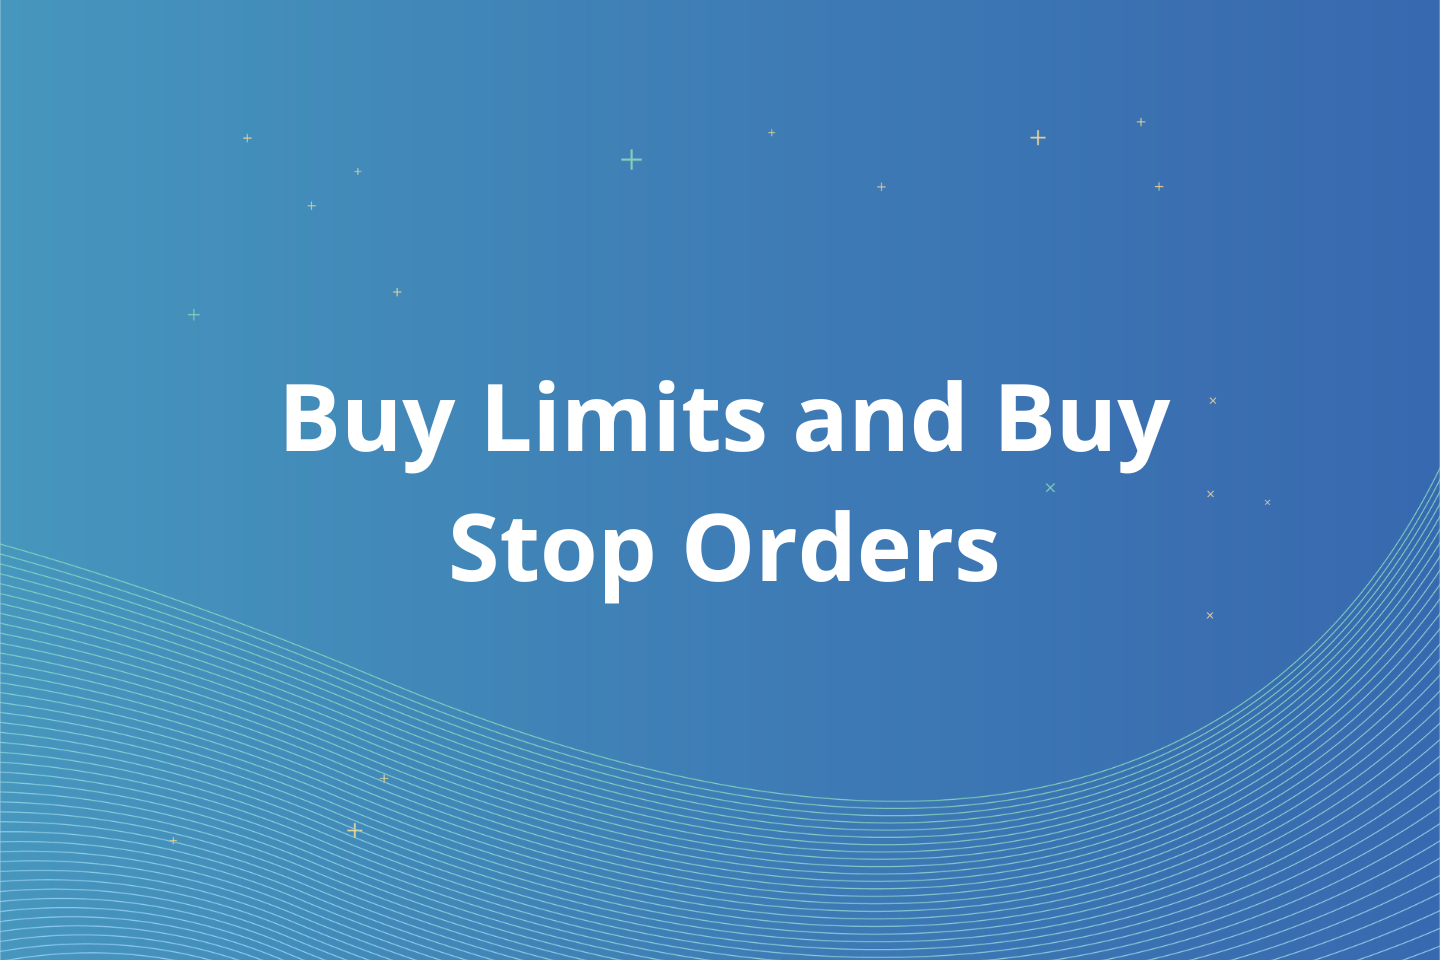 What Are Buy Limit and Buy Stop Orders?